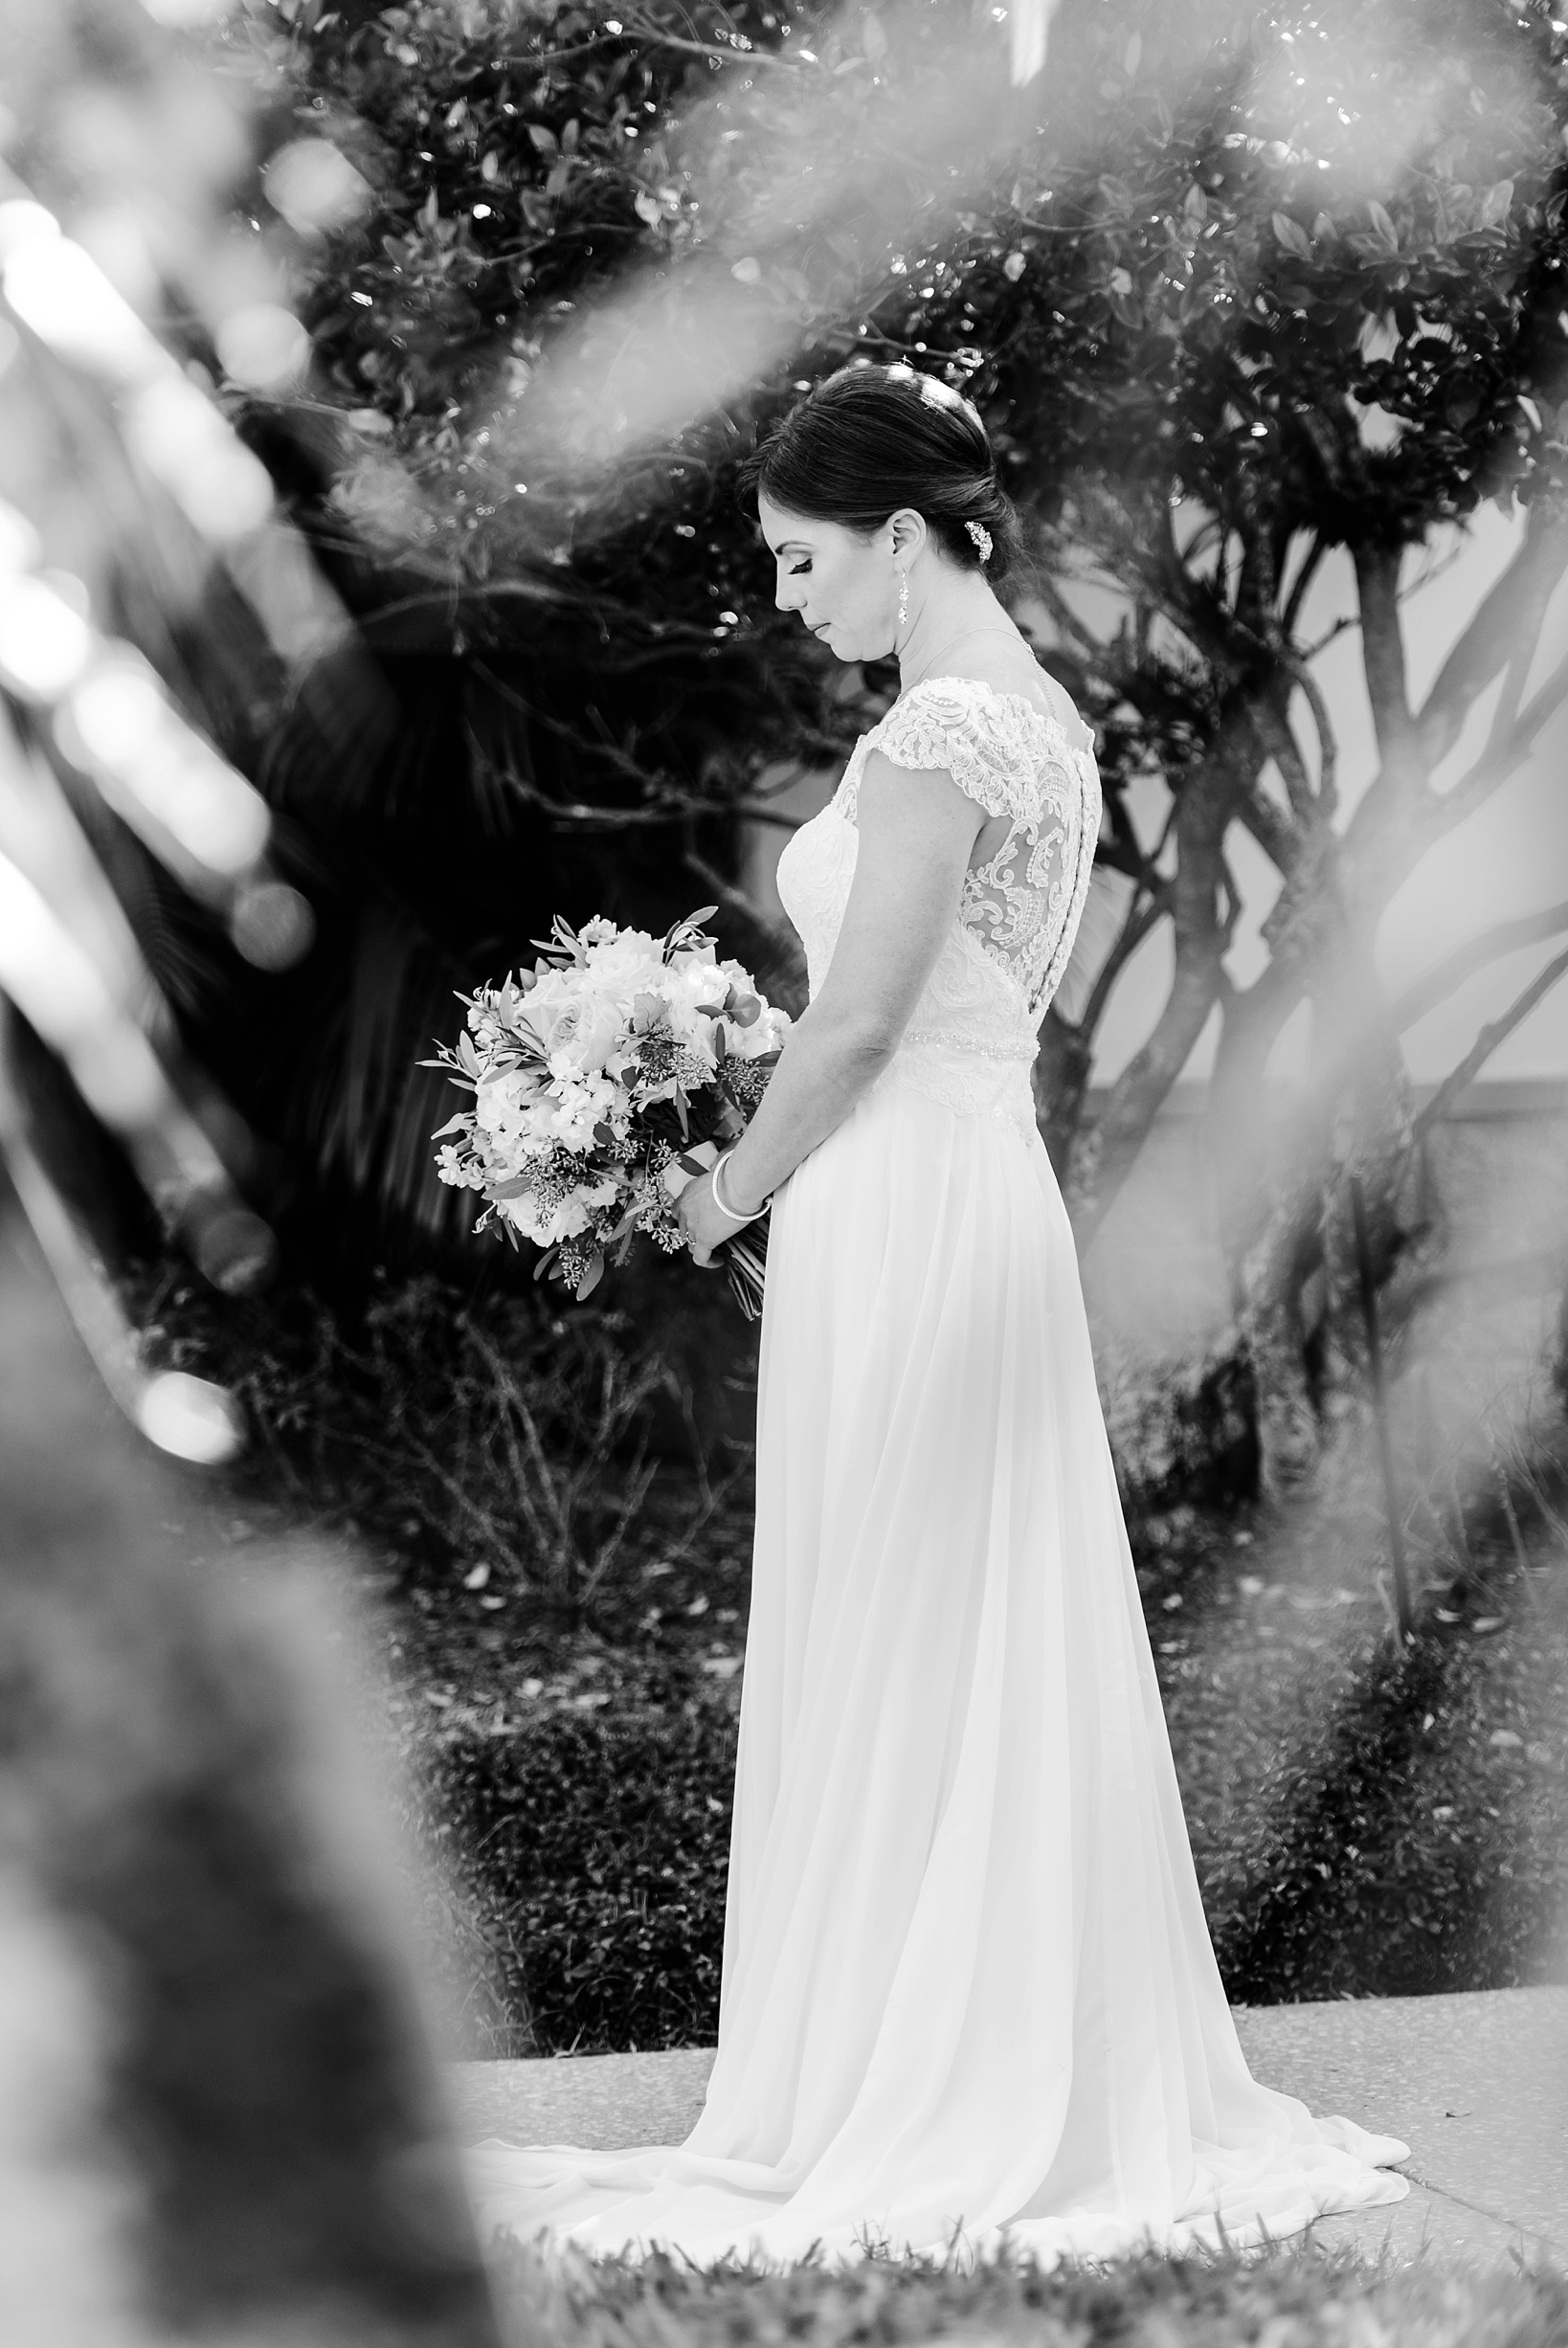 The bride surrounded by ferns in black and white